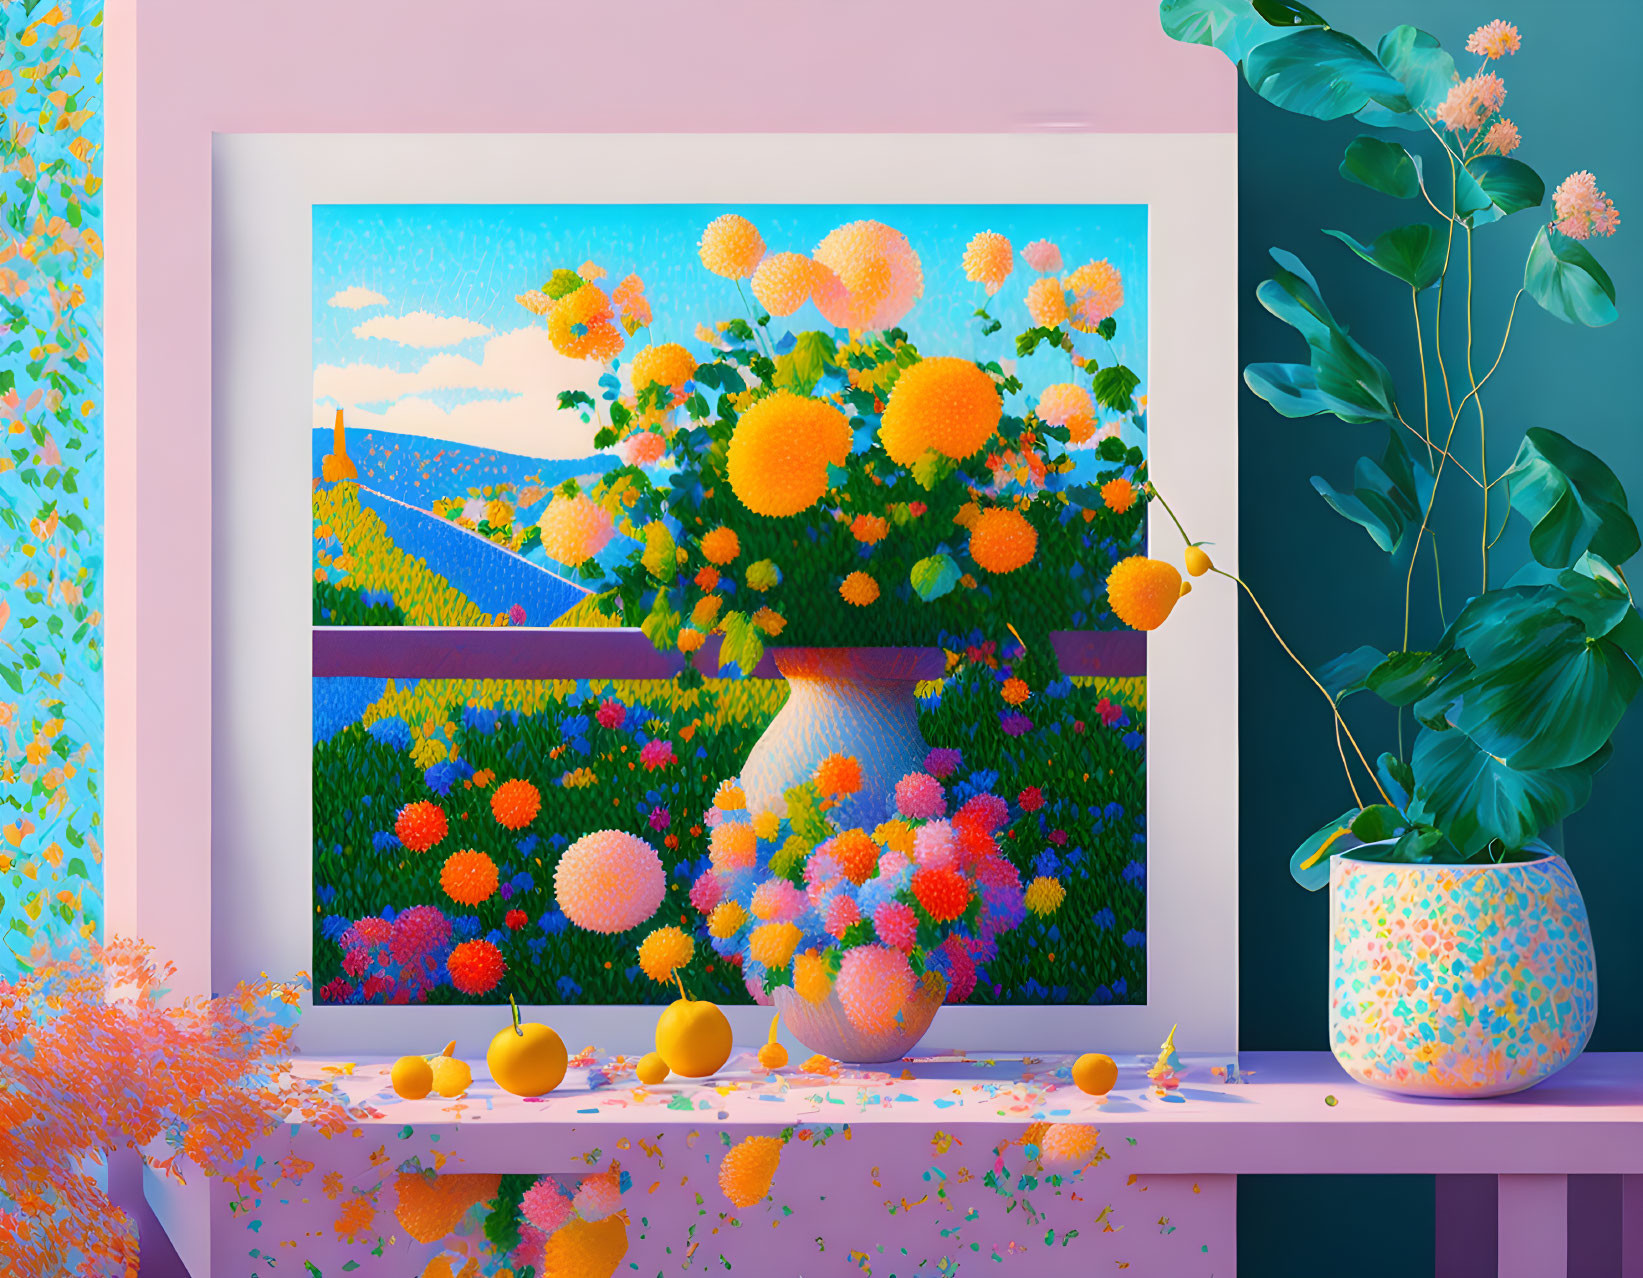 Colorful artwork of orange trees, fruits, and plant on pink and purple backdrop